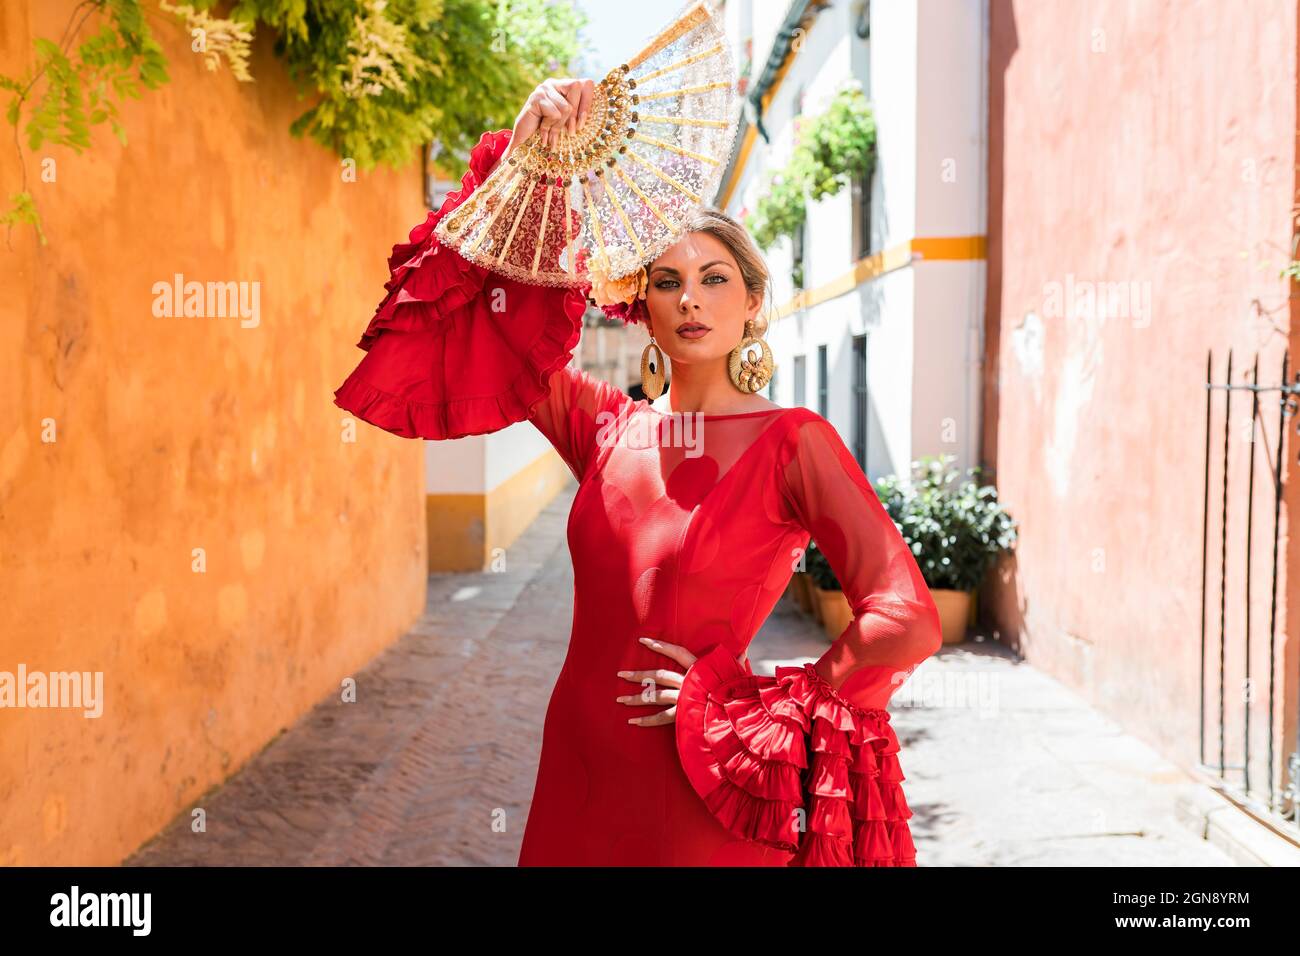 Female flamenco artist with hand fan standing at alley Stock Photo